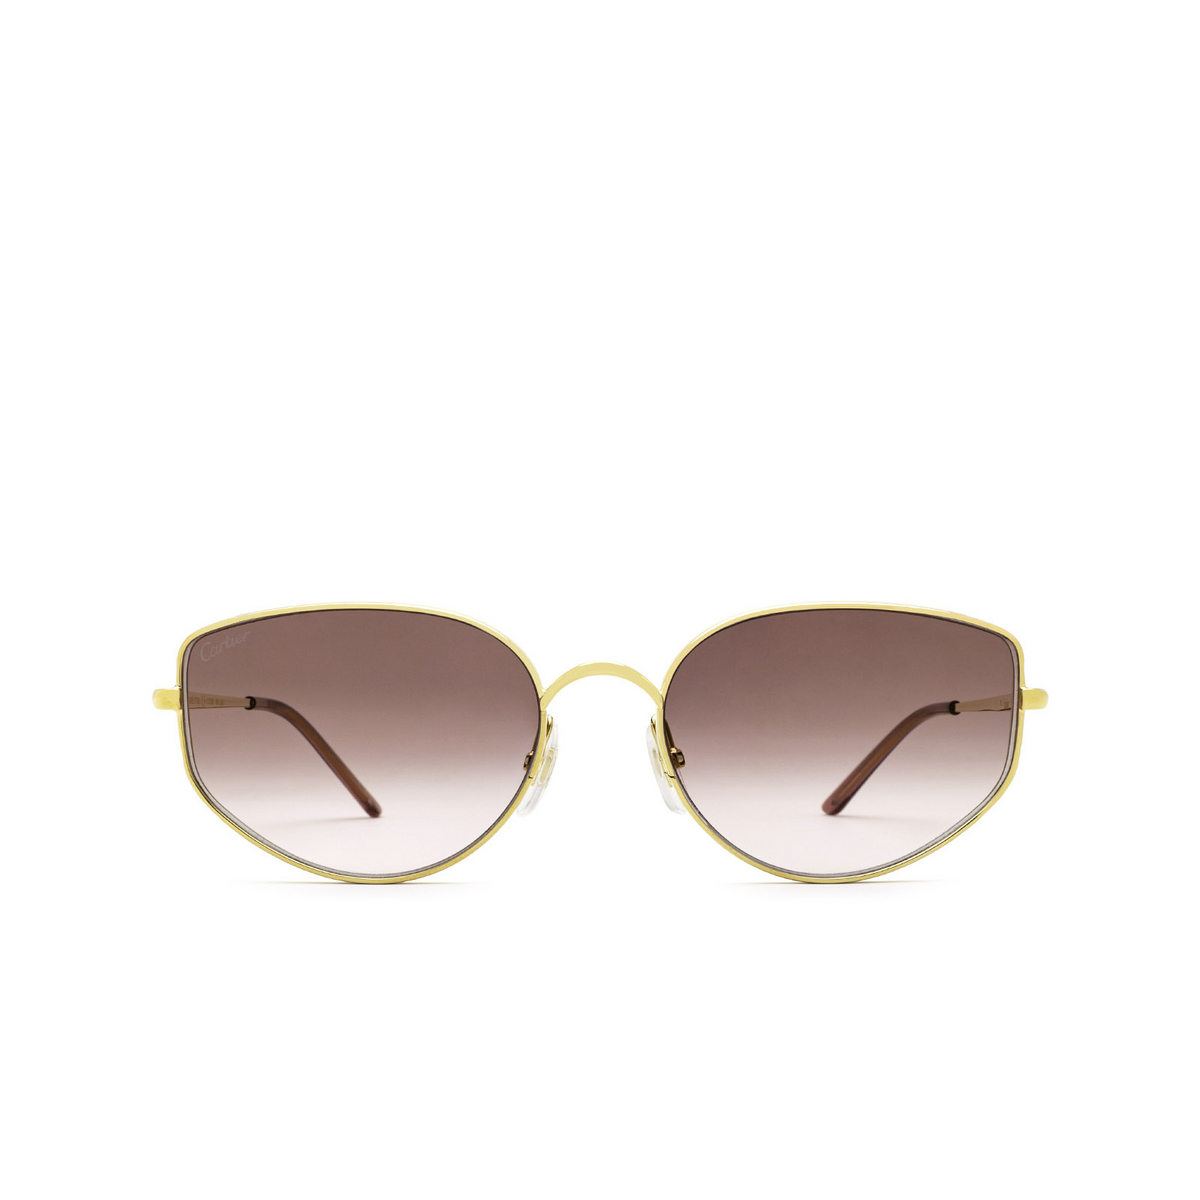 Cartier® Cat-eye Sunglasses: CT0300S color Gold 003 - front view.